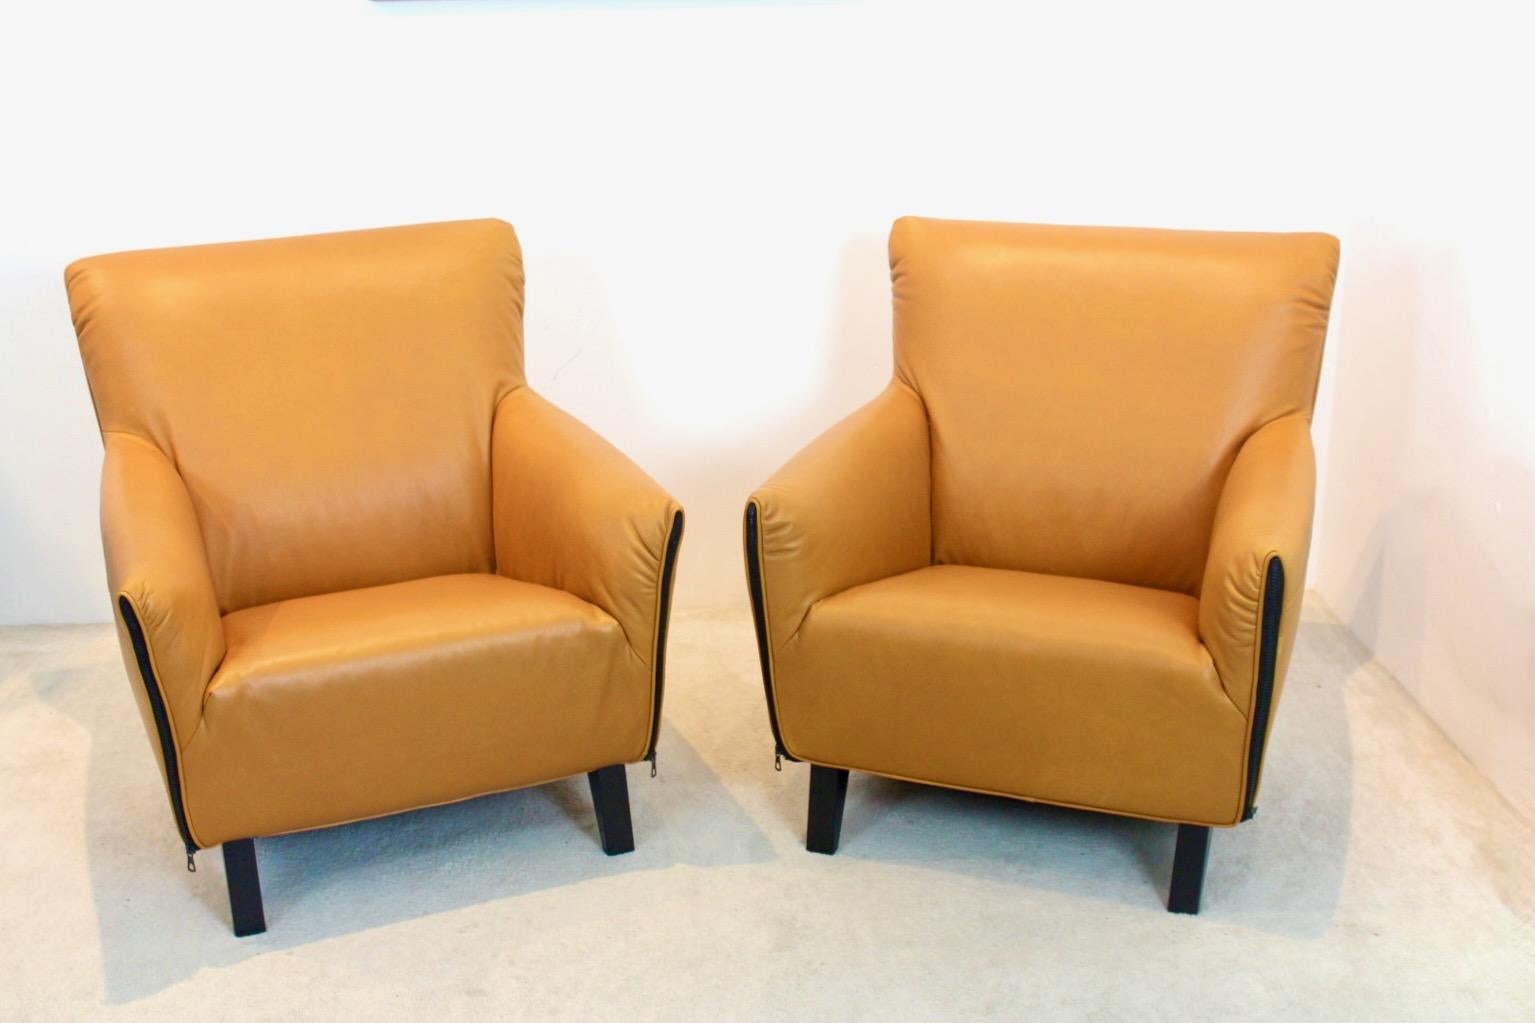 20th Century Set of Iconic Artifort F330 ‘Cordoba’ Lounge Chairs in Soft Ochre Leather For Sale